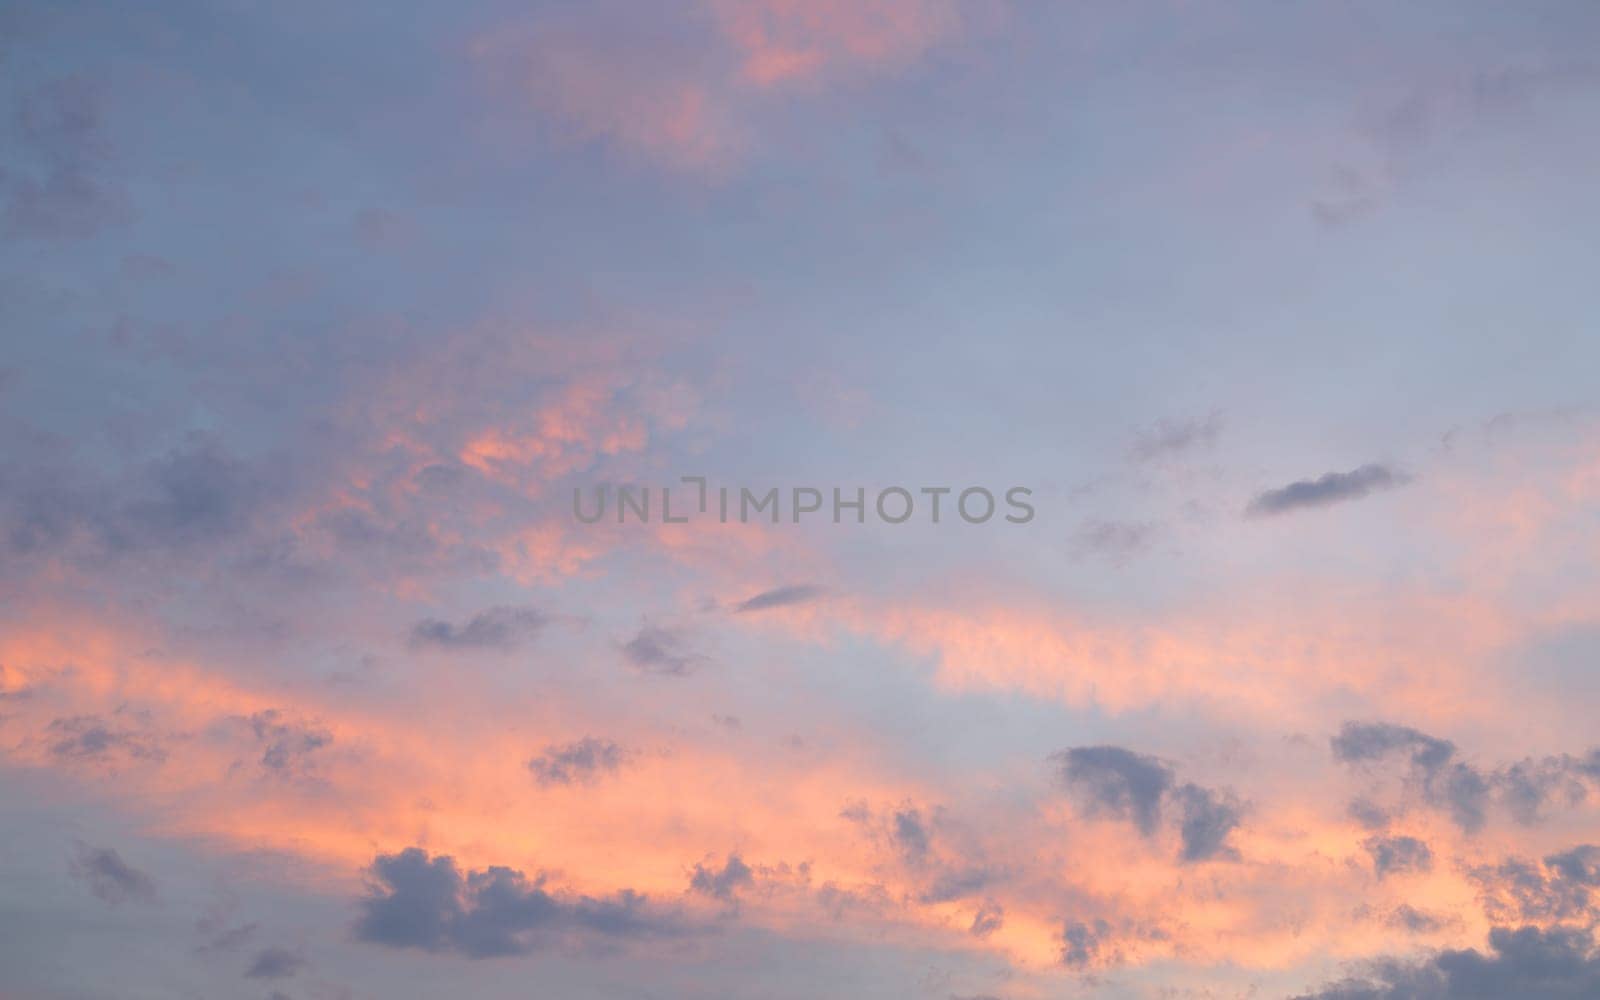 Sky with clouds by alfotokunst